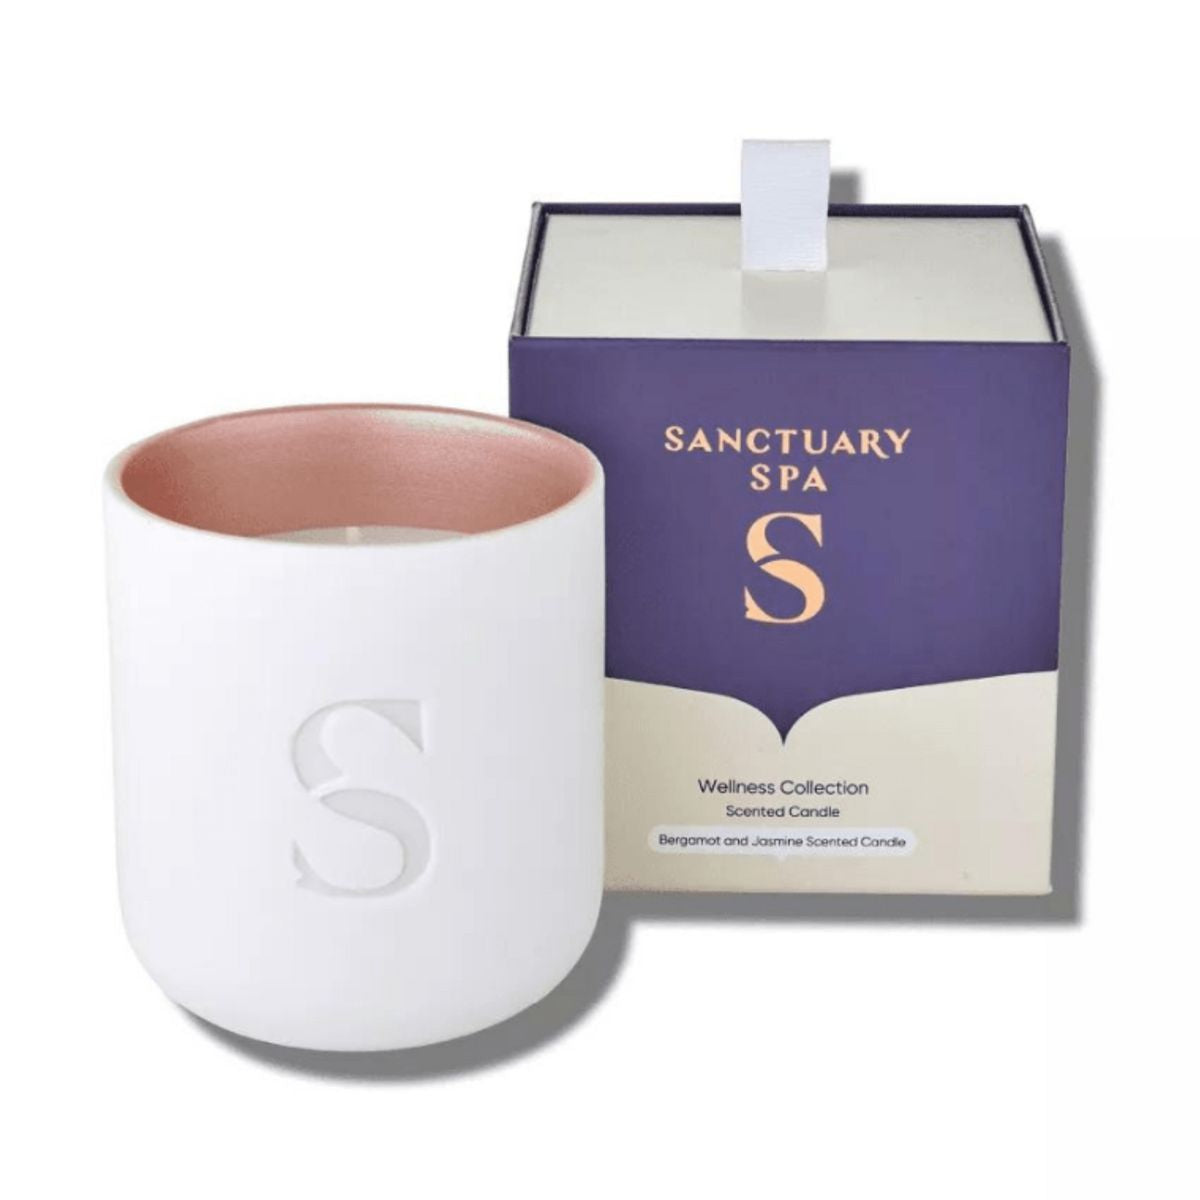 Sanctuary SPA Candle Wellness Scent